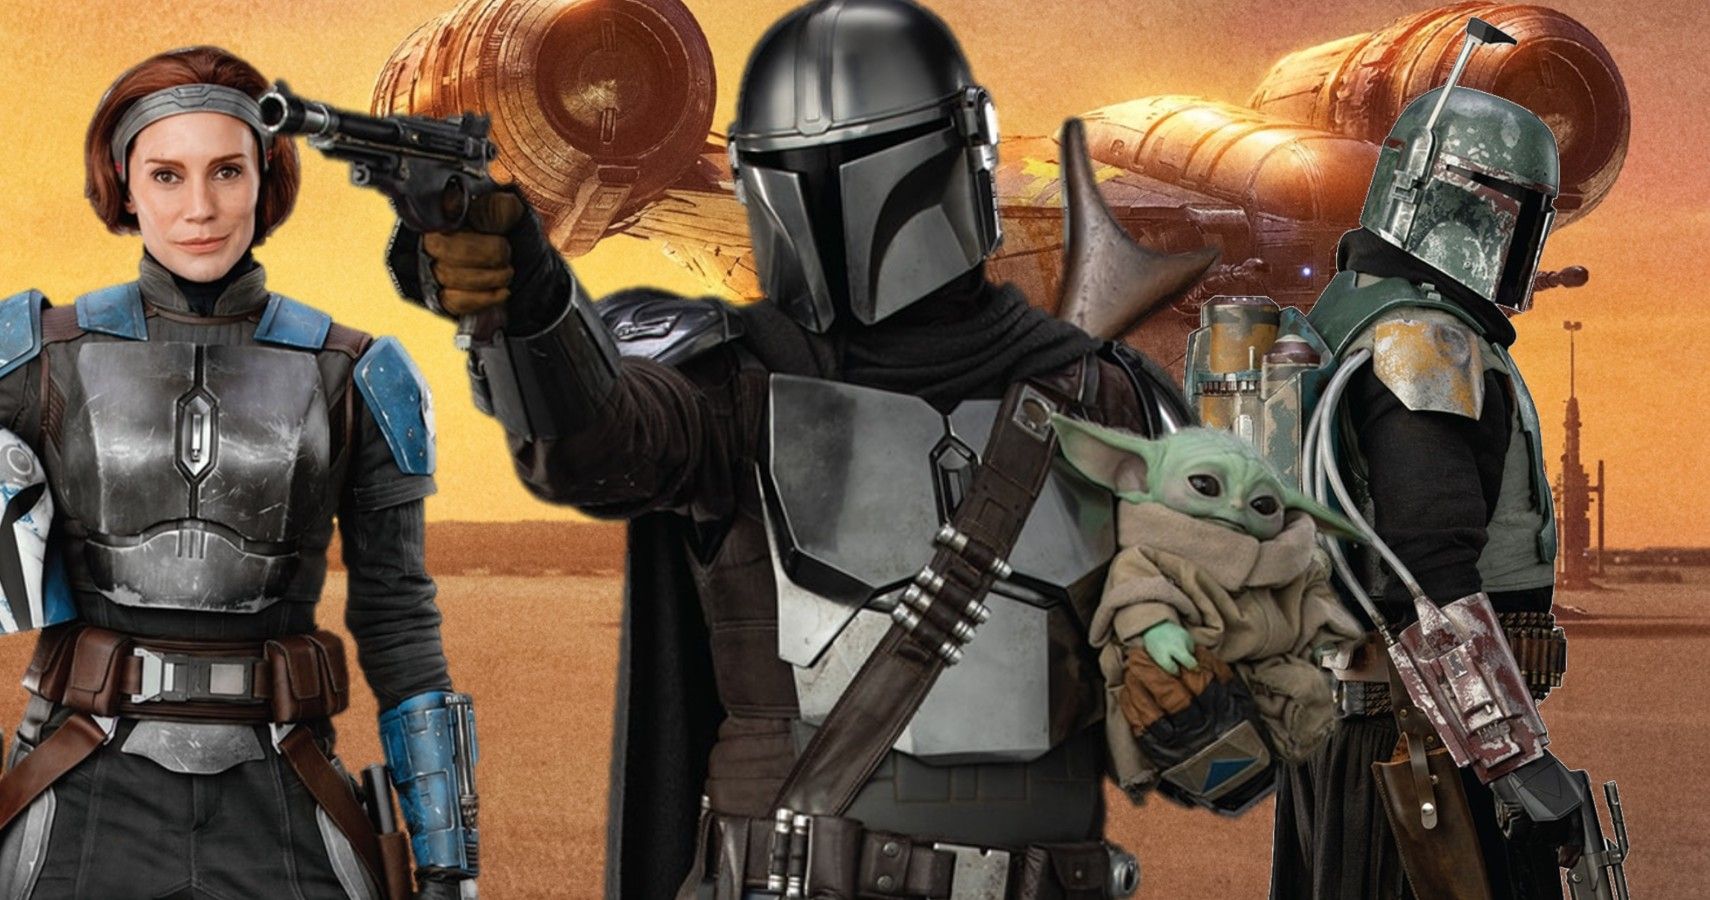 Characters from Disney's Star Wars: The Mandalorian.